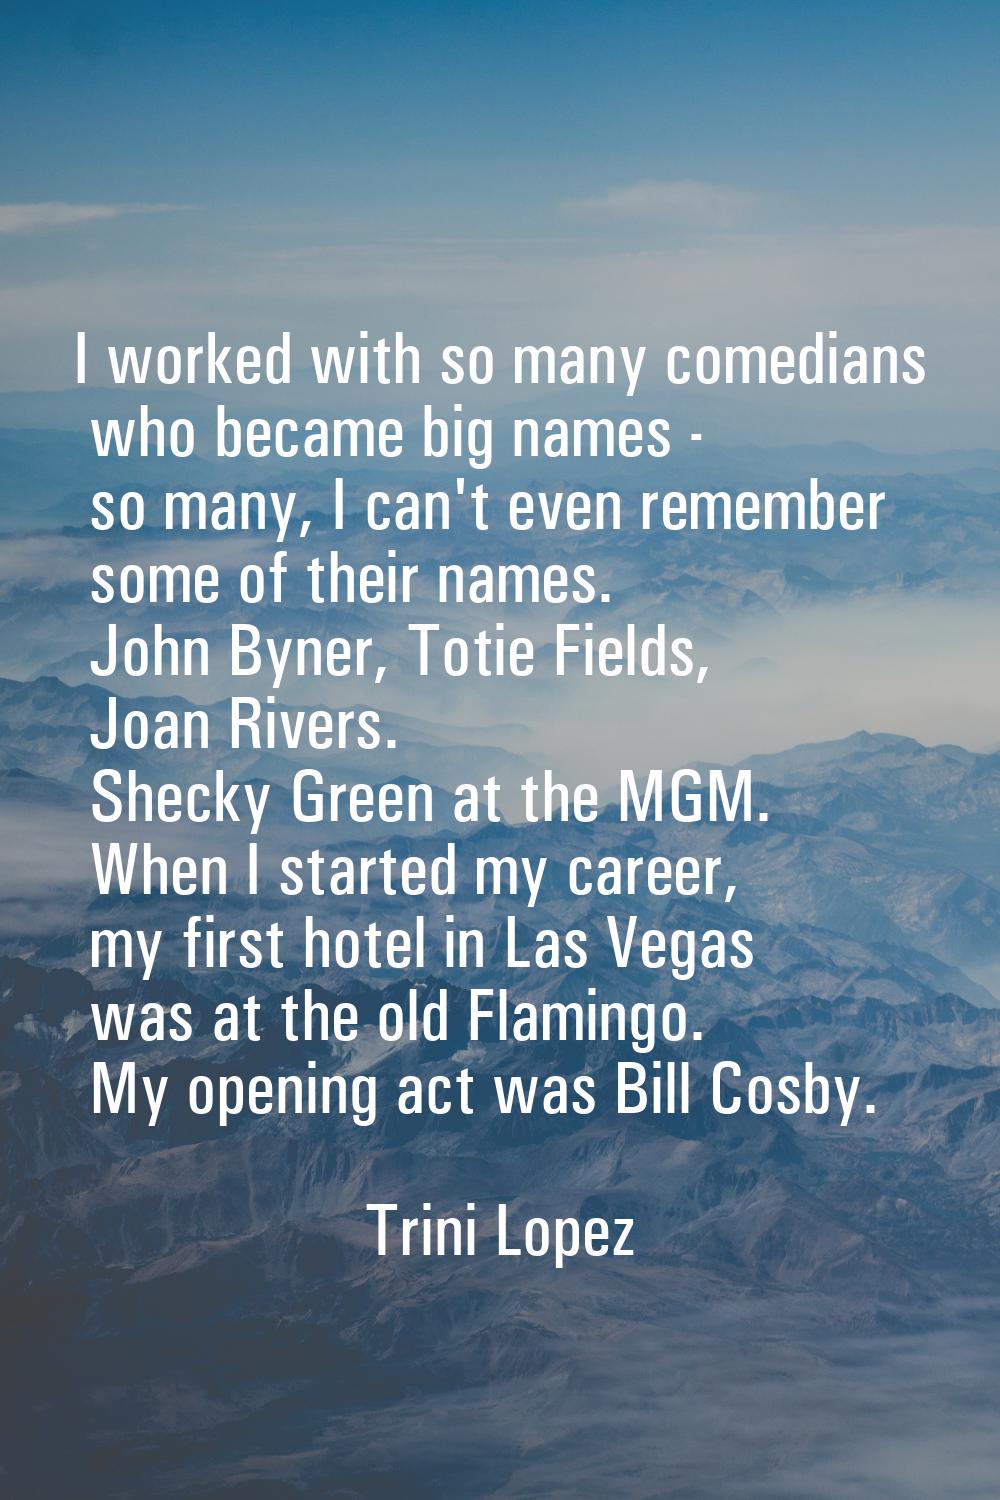 I worked with so many comedians who became big names - so many, I can't even remember some of their